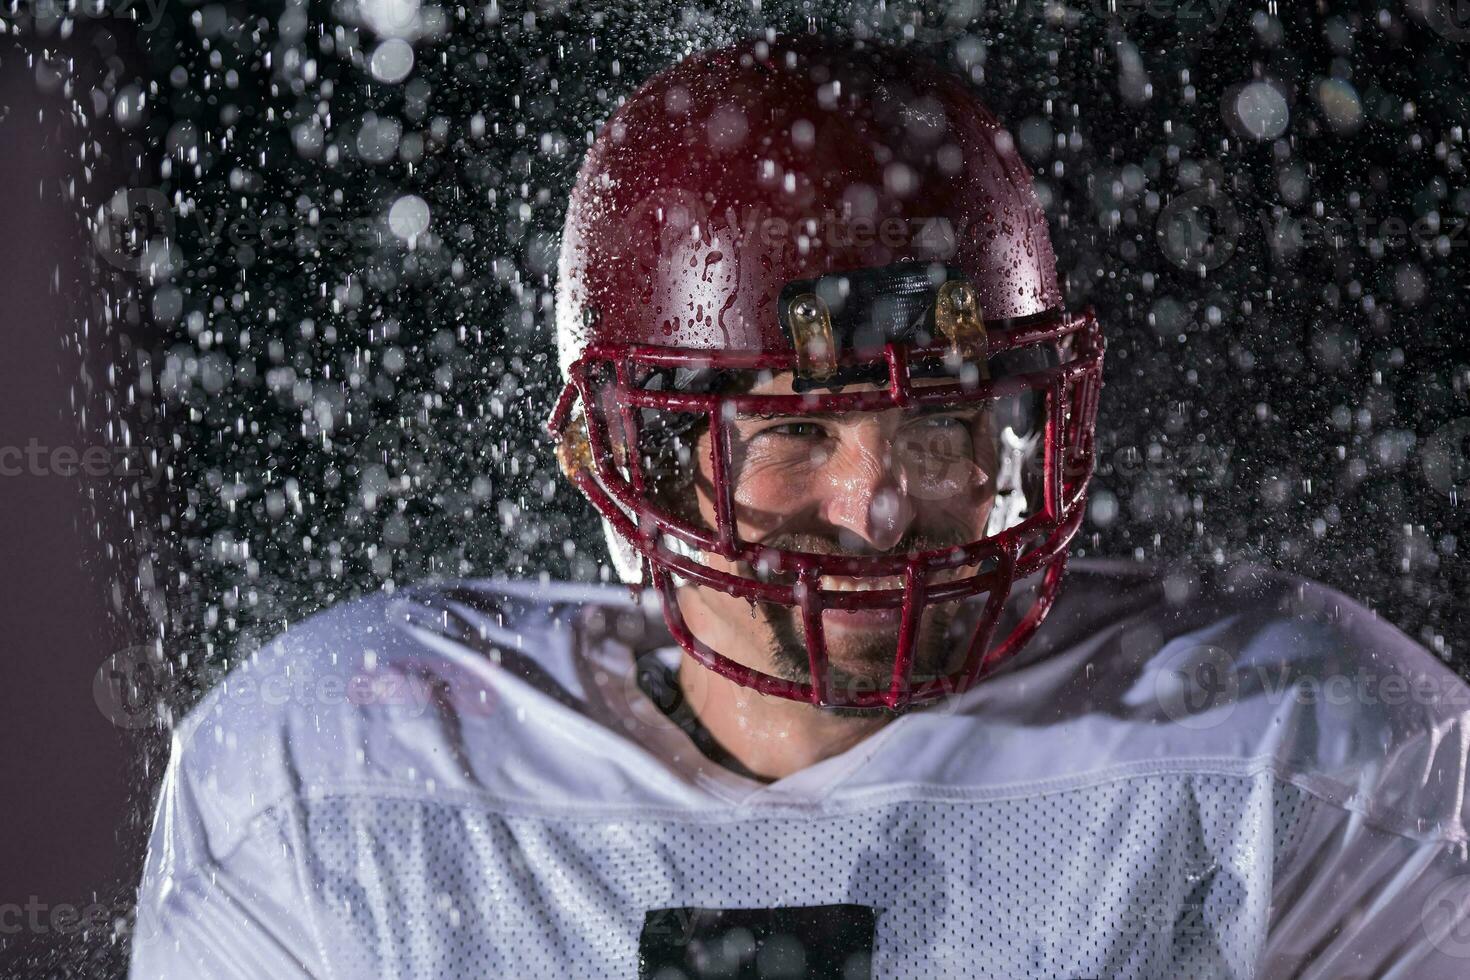 American Football Field Lonely Athlete Warrior Standing on a Field Holds his Helmet and Ready to Play. Player Preparing to Run, Attack and Score Touchdown. Rainy Night with Dramatic Fog, Blue Light photo